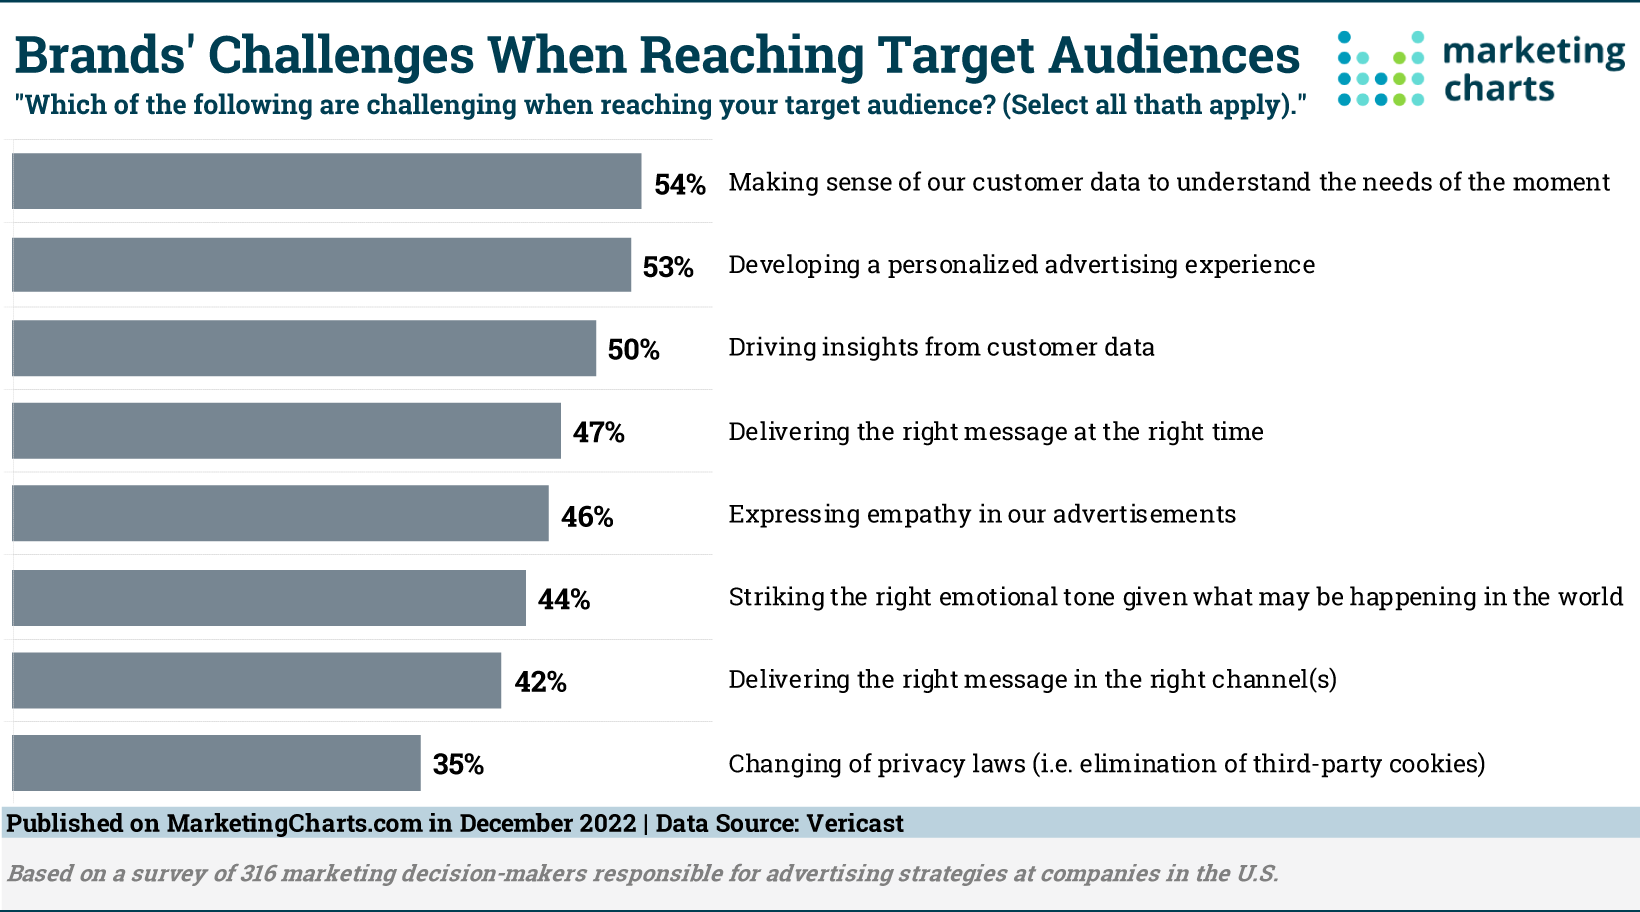 Brands Challenges when reaching target audiences